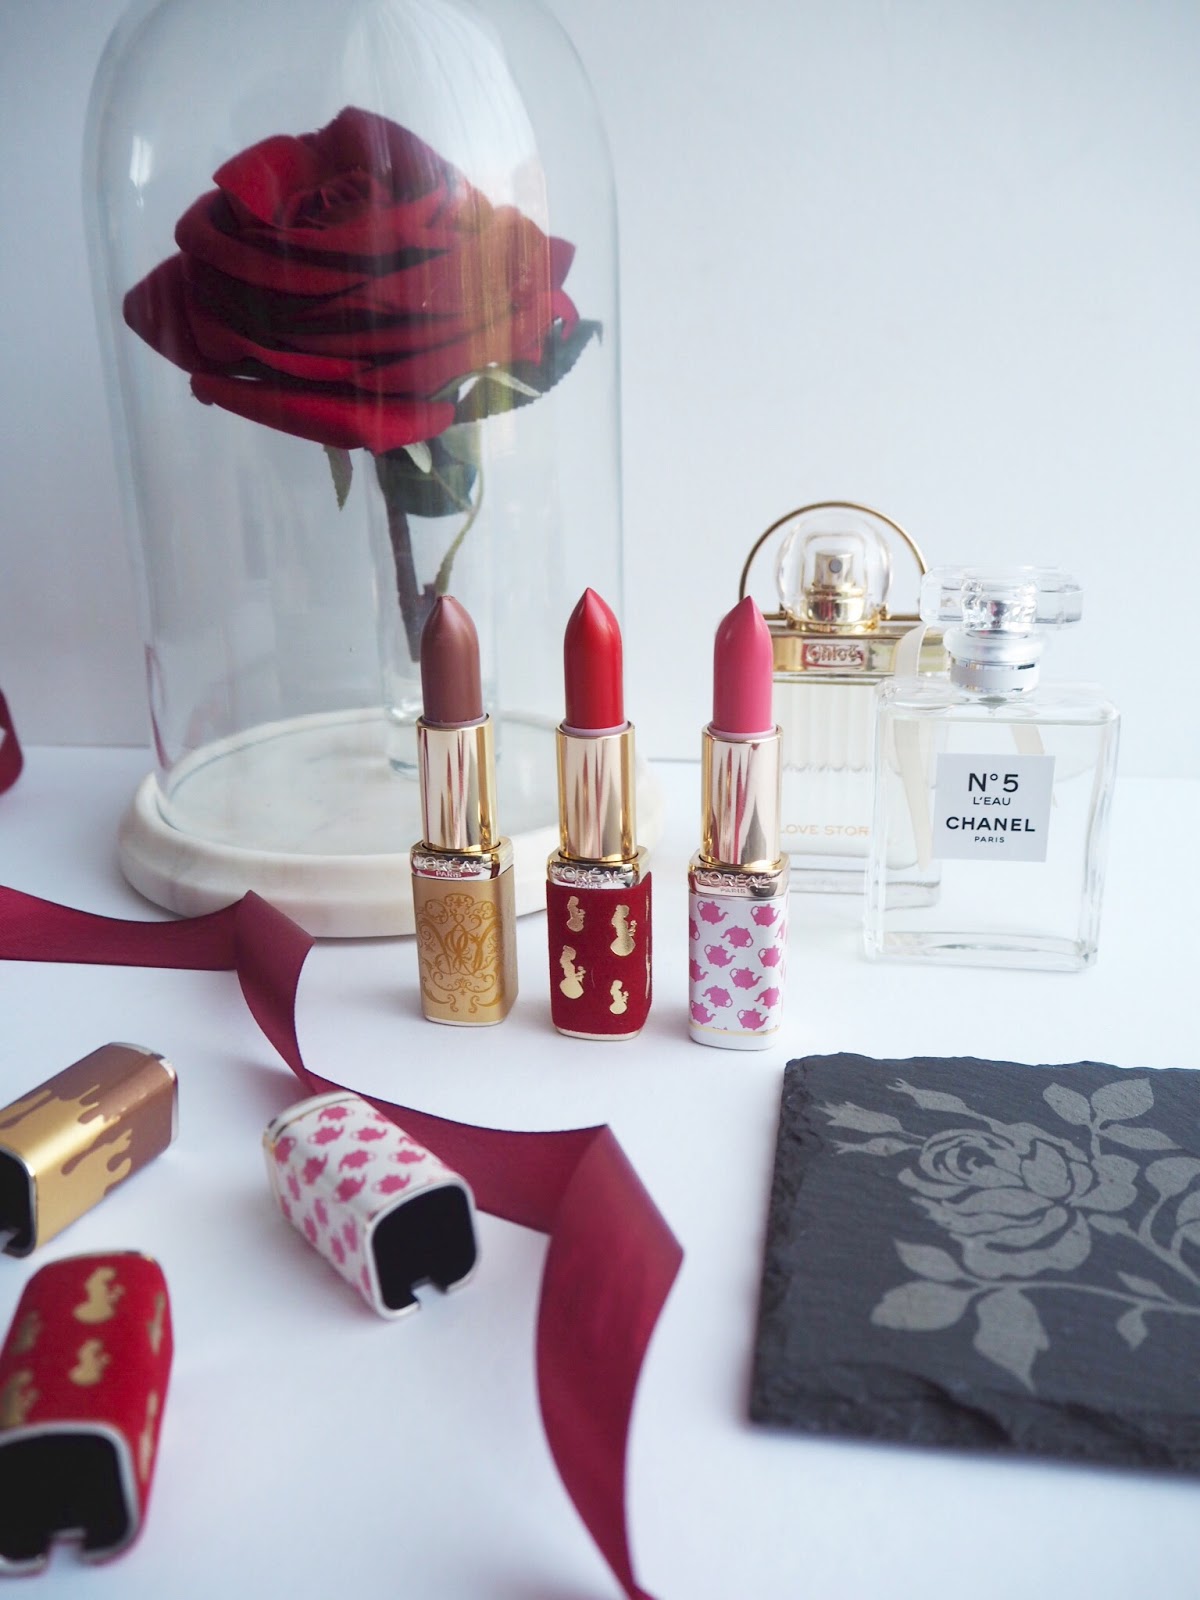 Defeating Stress, Beauty and the beast L'oreal Lipstick